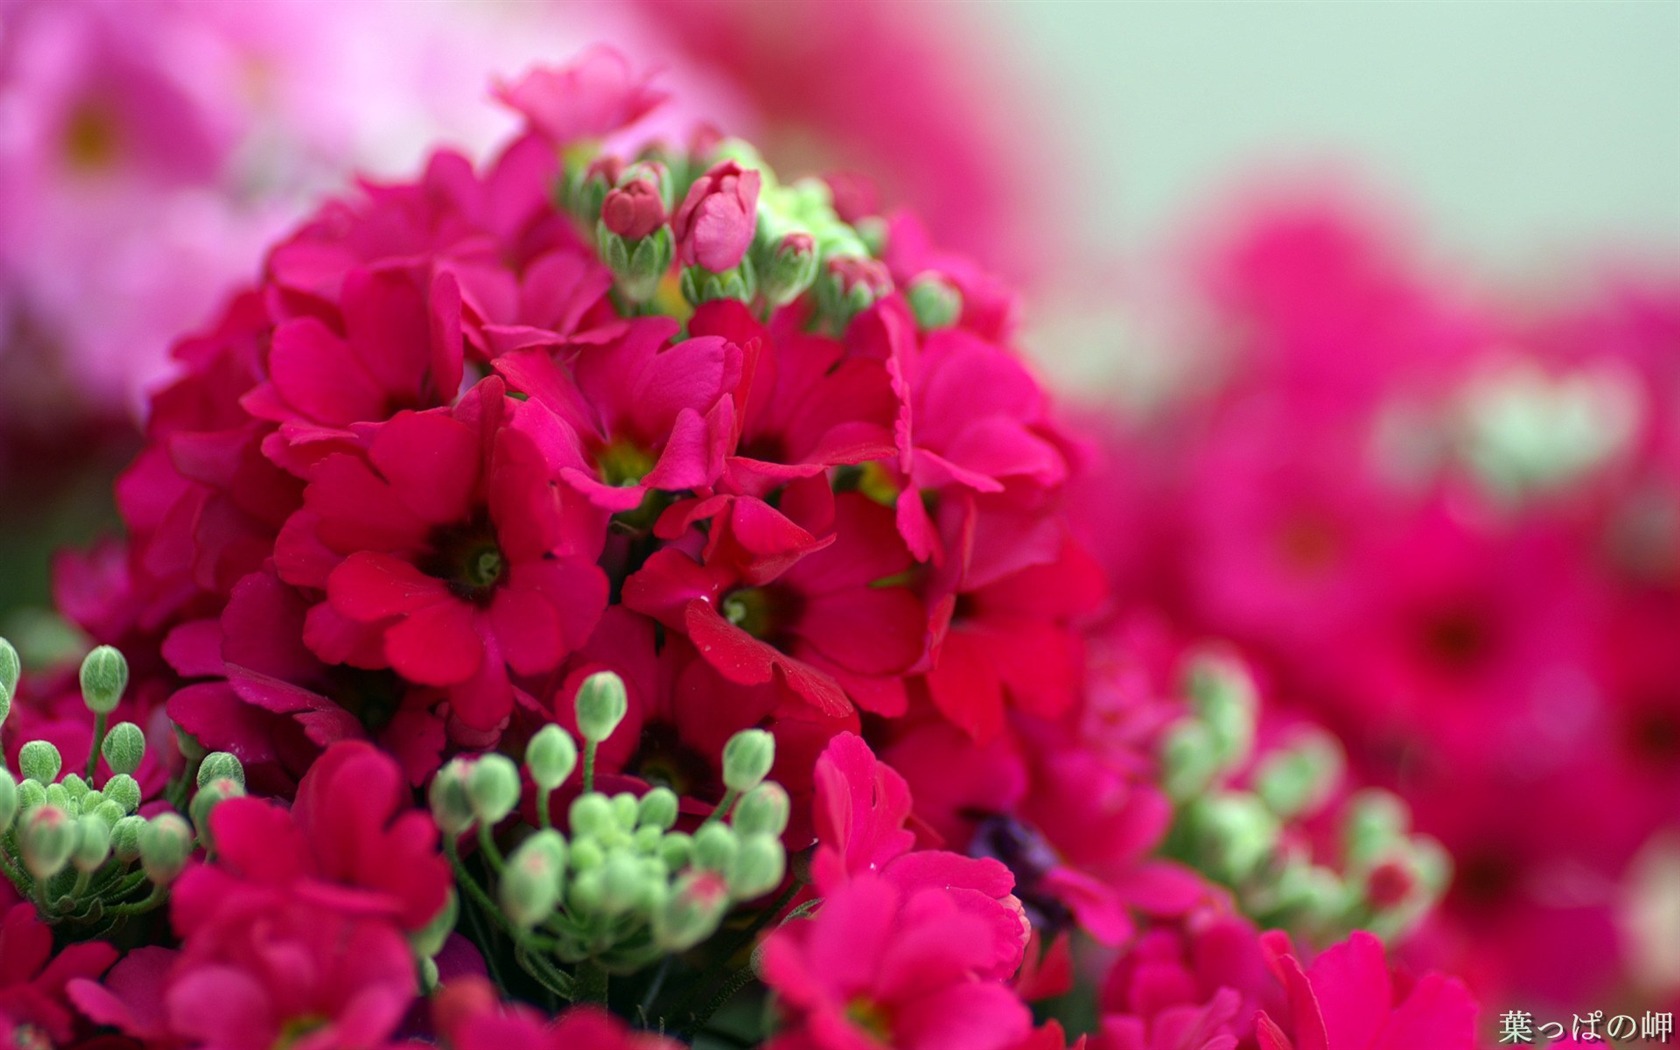 Personal Flowers HD Wallpapers #27 - 1680x1050